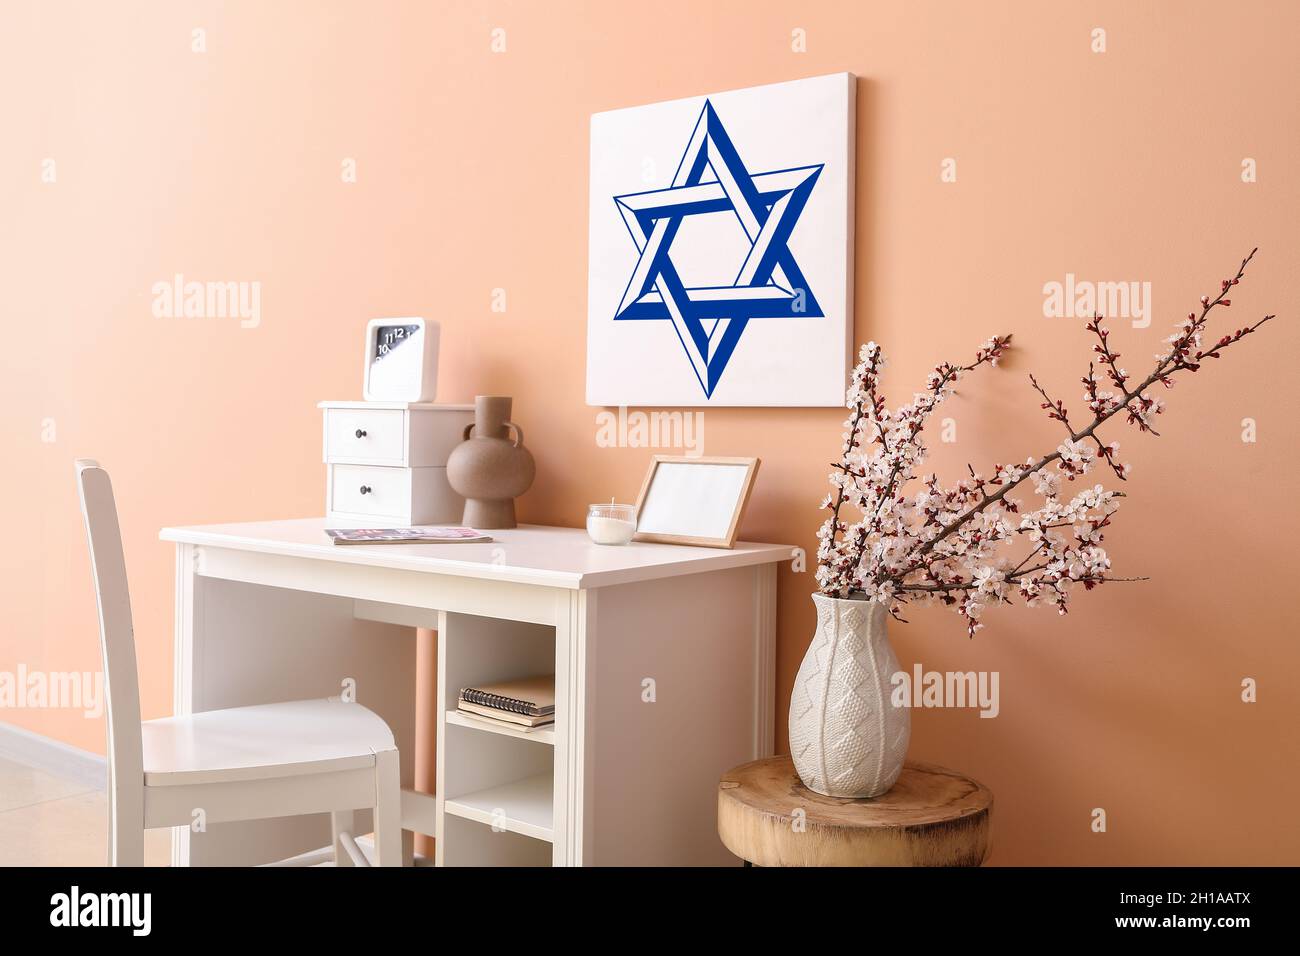 Painting of David Star hanging on color wall in interior of room Stock Photo